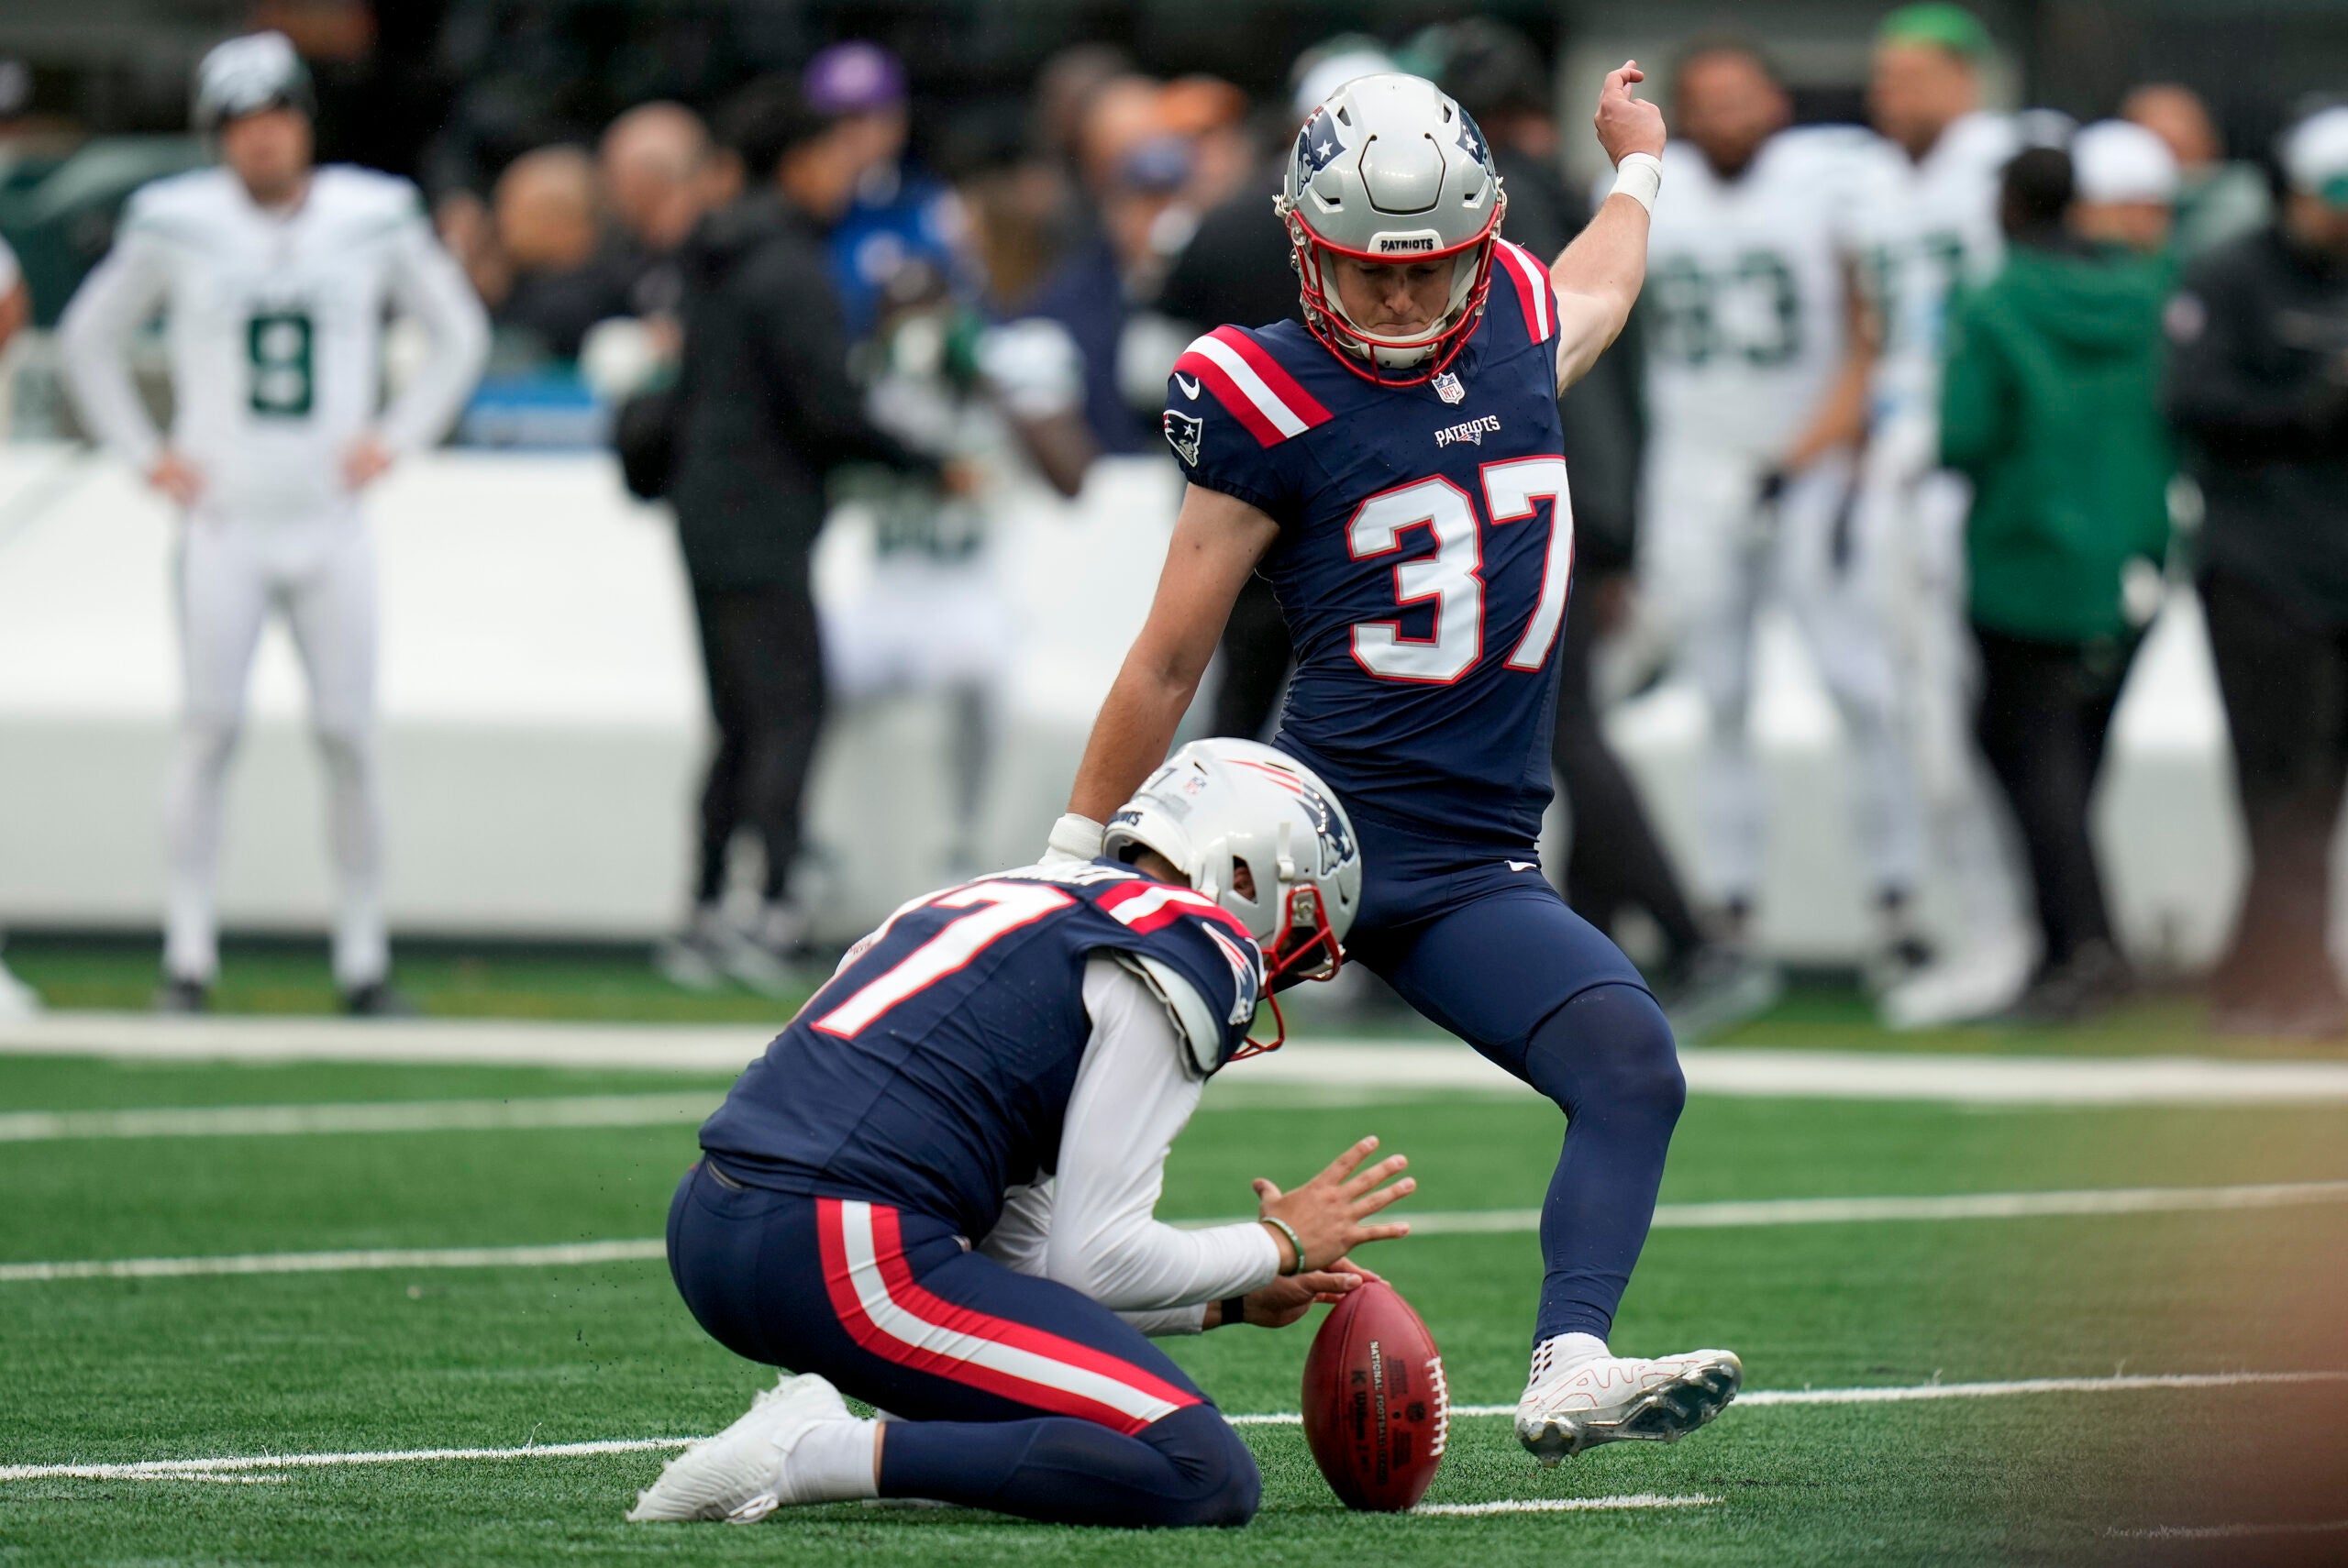 New England Patriots place kicker Chad Ryland kicks a field goal against the New York Jets. 